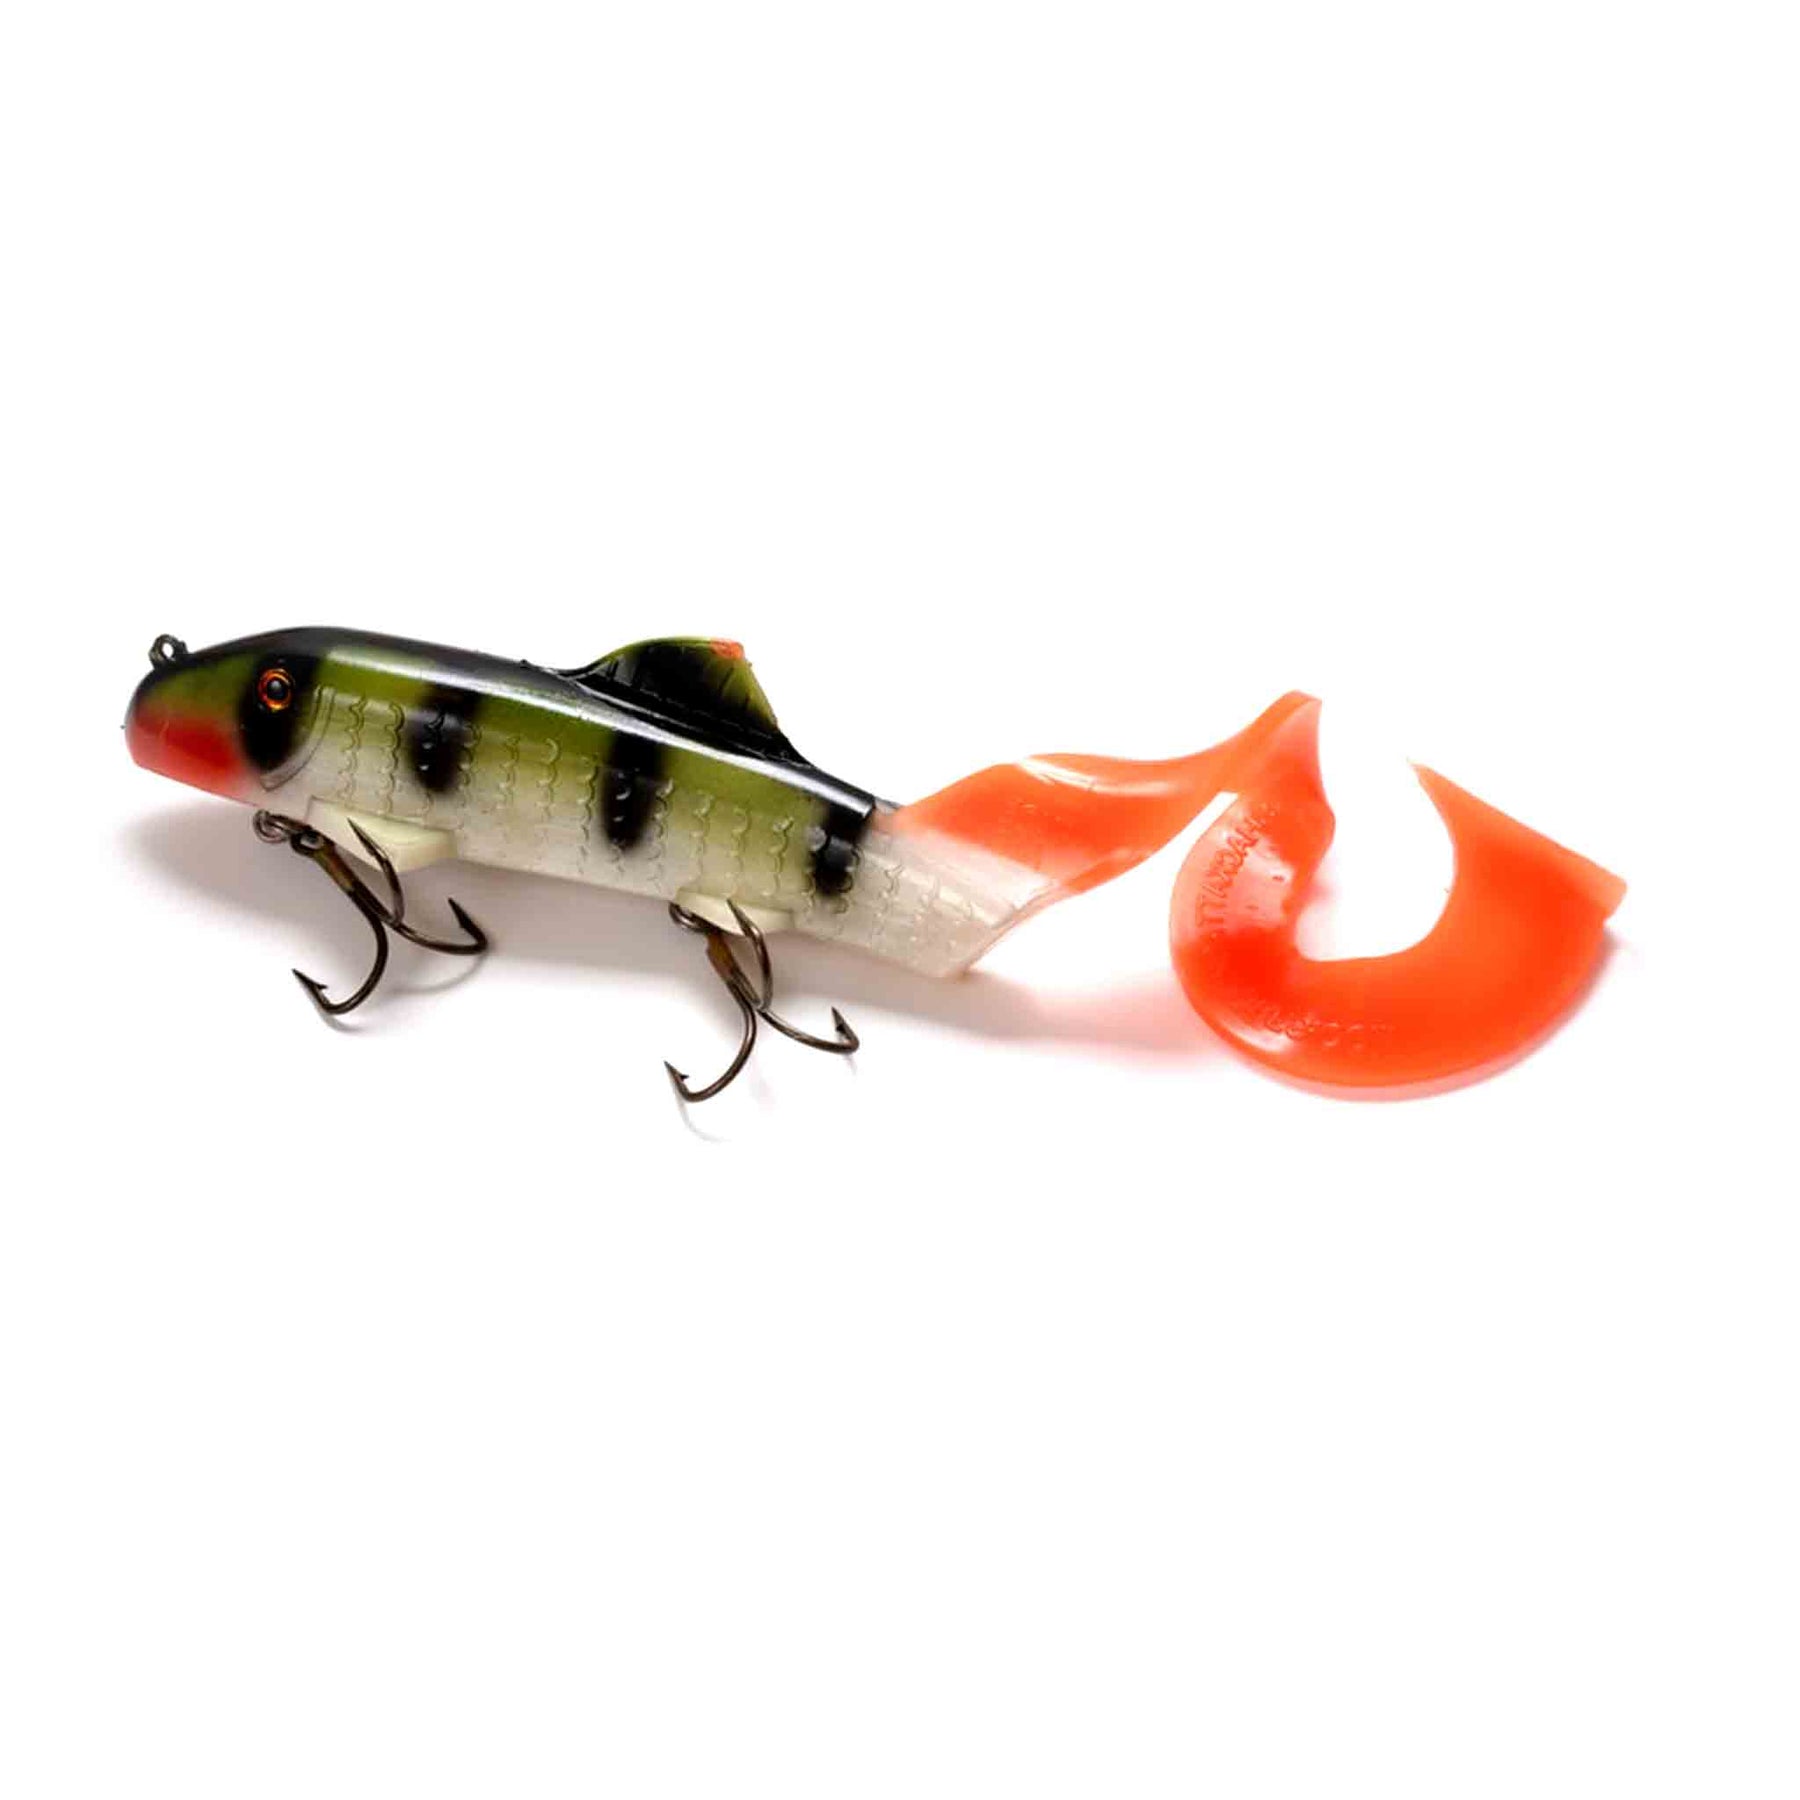 View of Rubber Suick Curly Sue 9" Hot Perch available at EZOKO Pike and Musky Shop